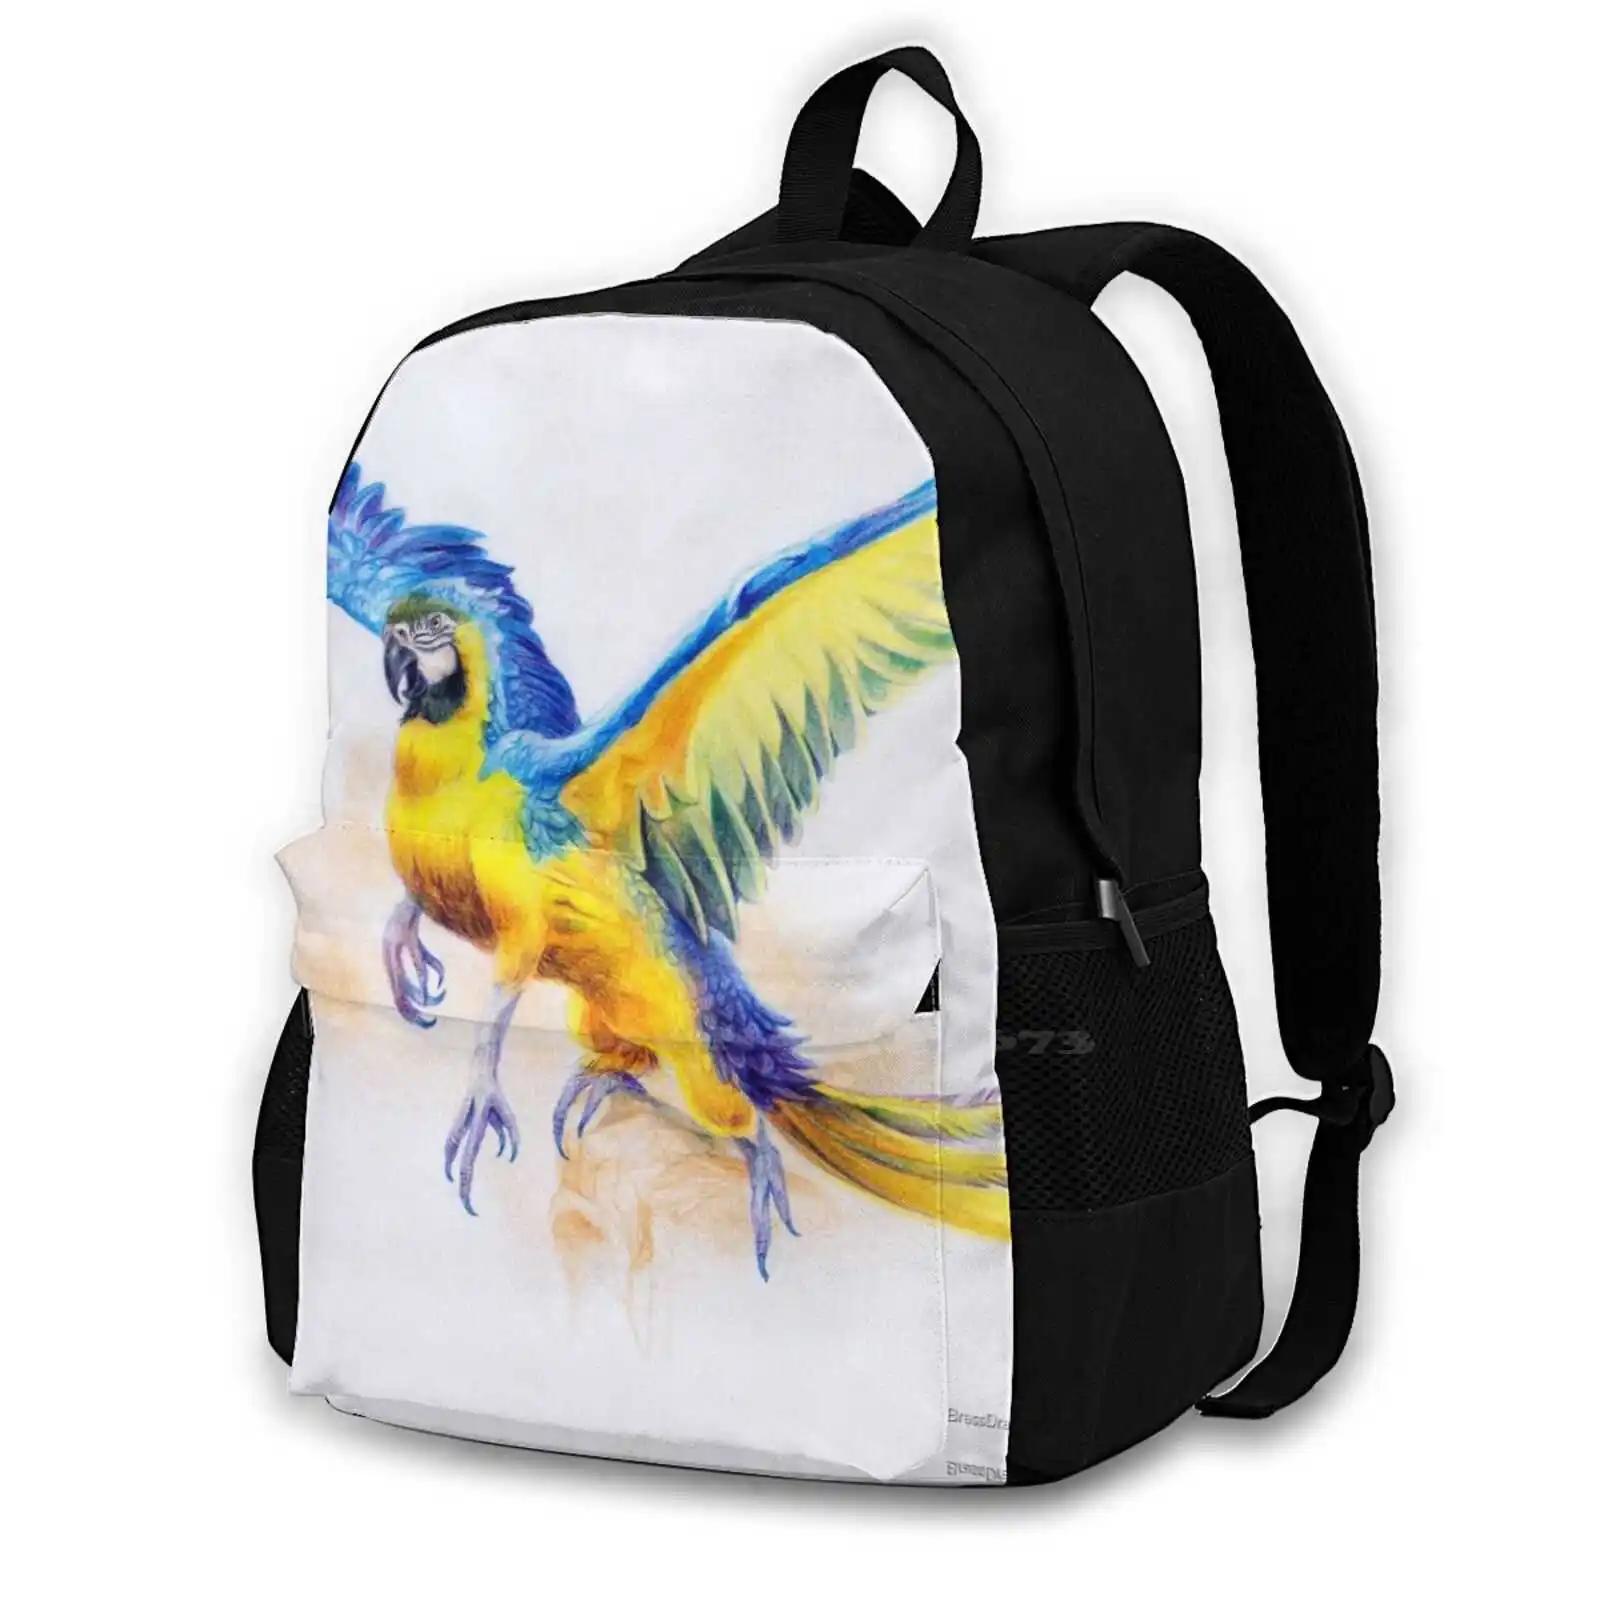 

Of The Jungle Backpack For Student School Laptop Travel Bag Griffin Griffon Parrot Jungle Fantasy Bird Cool Cacadoo